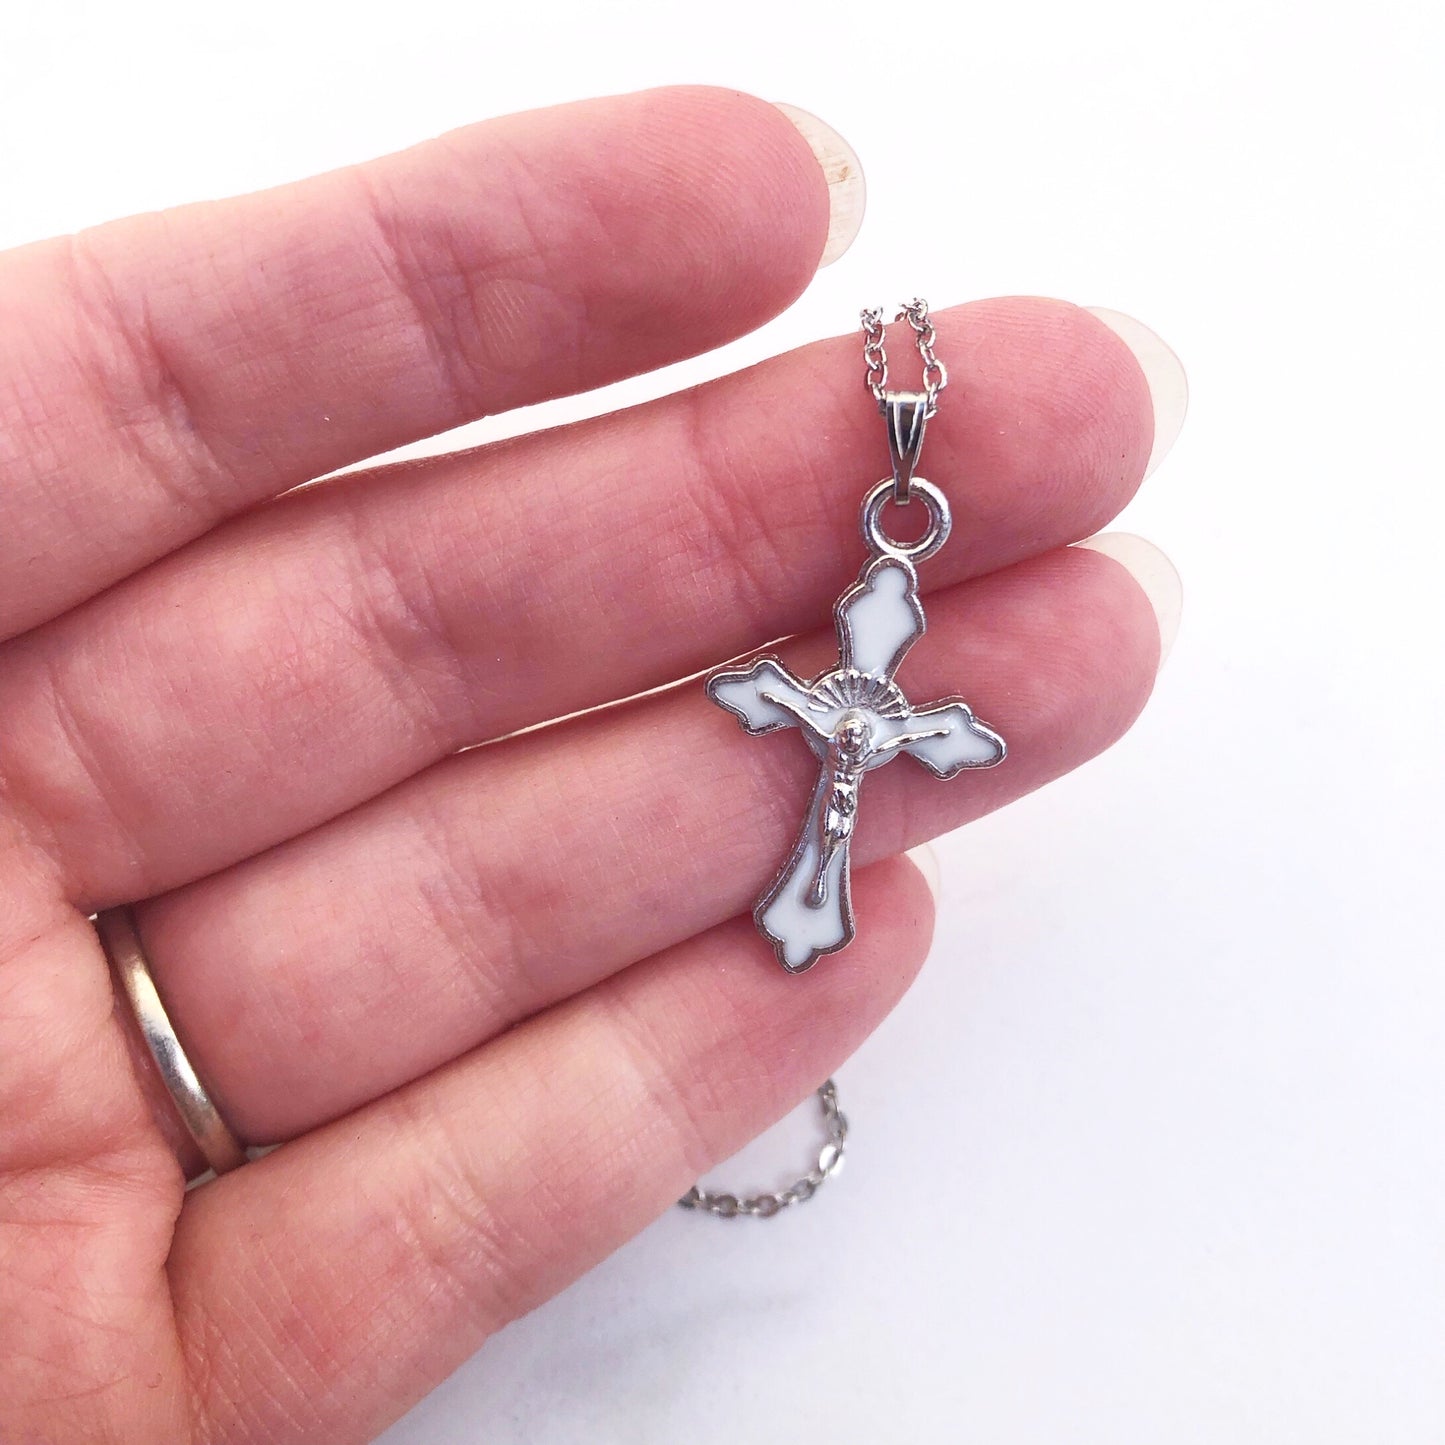 Pendant: Crucifix Enamel with Silver on Chain